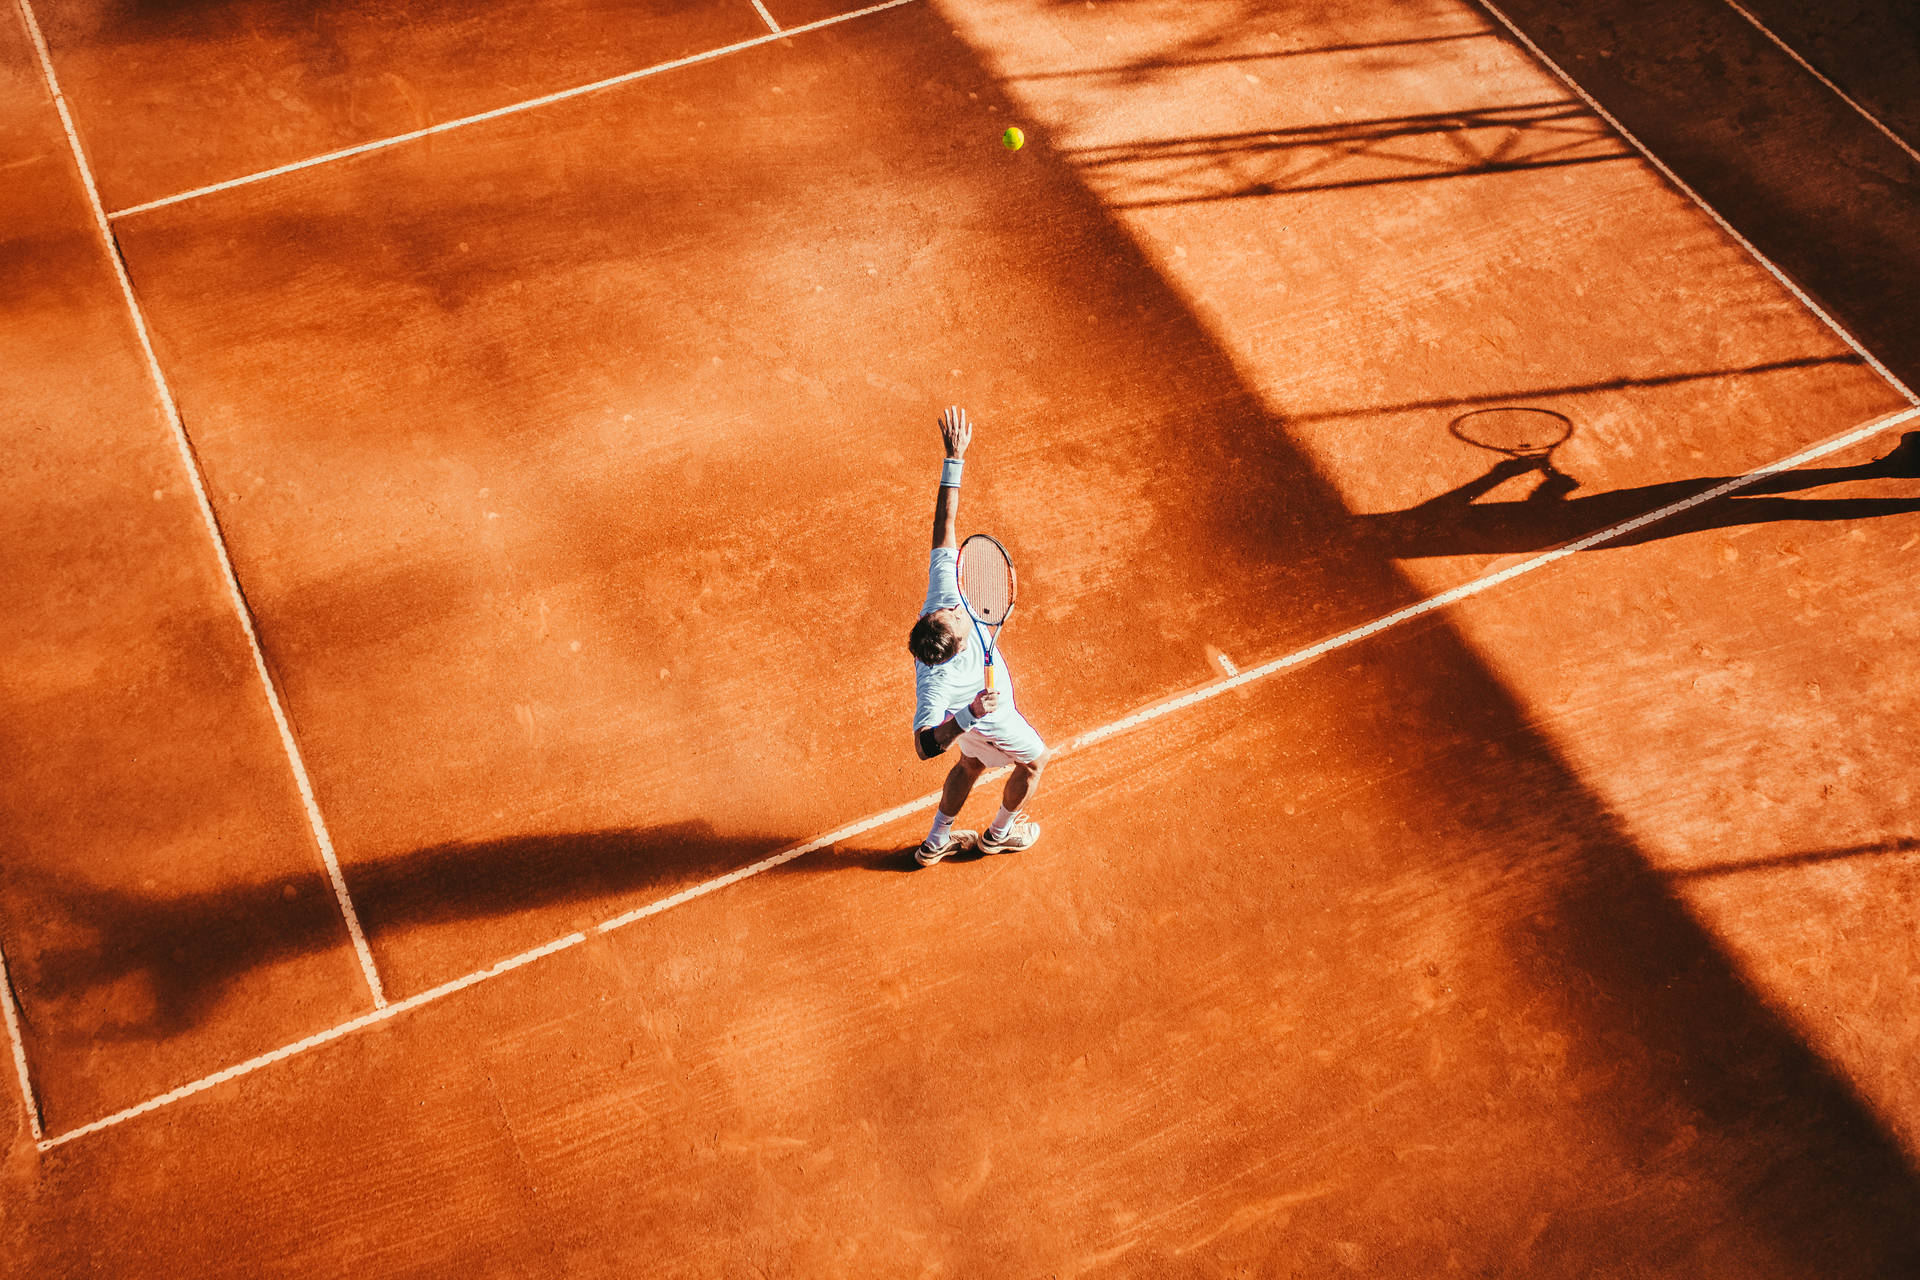 Tennis 5184X3456 Wallpaper and Background Image